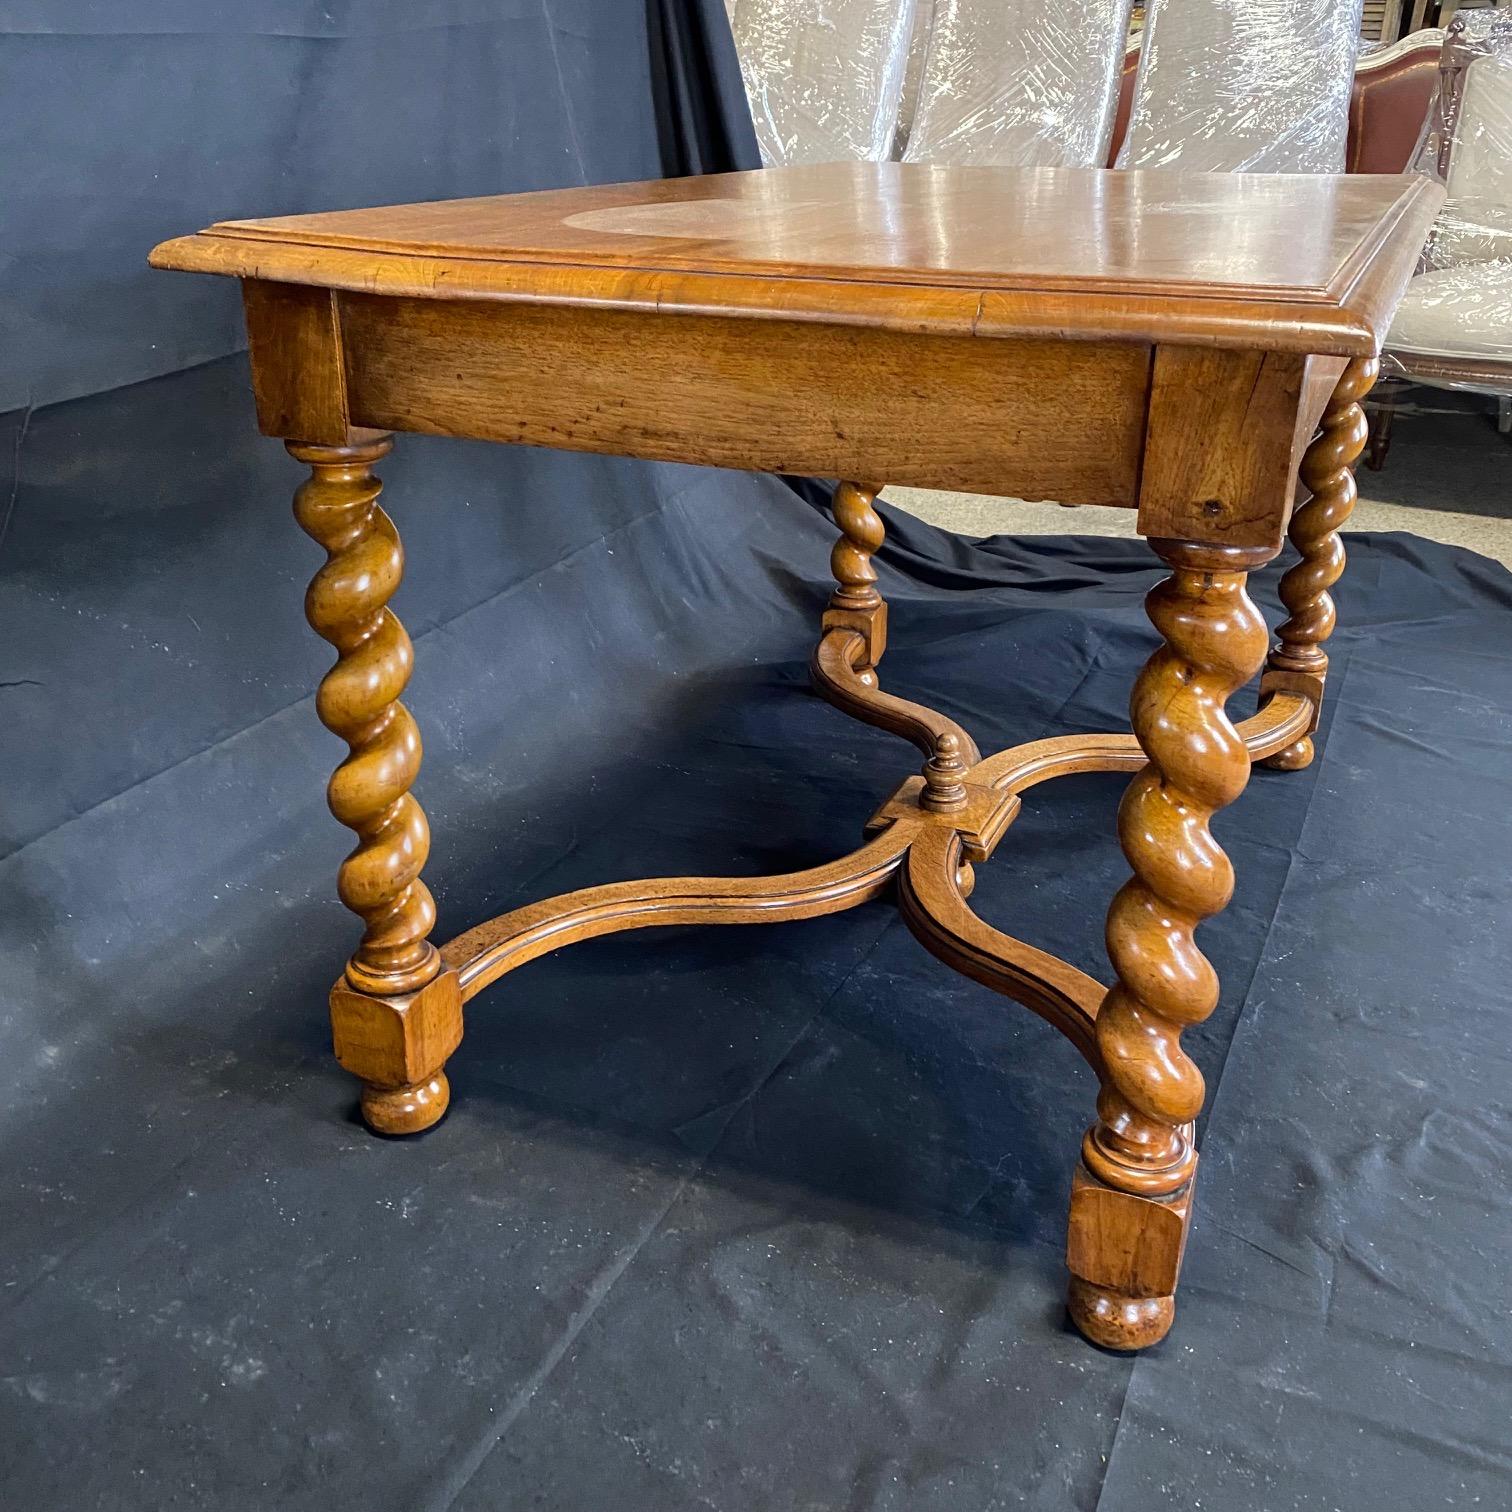 Mid-19th Century Stunning 19th Century Walnut French Barley Twist Center or Dining Table For Sale